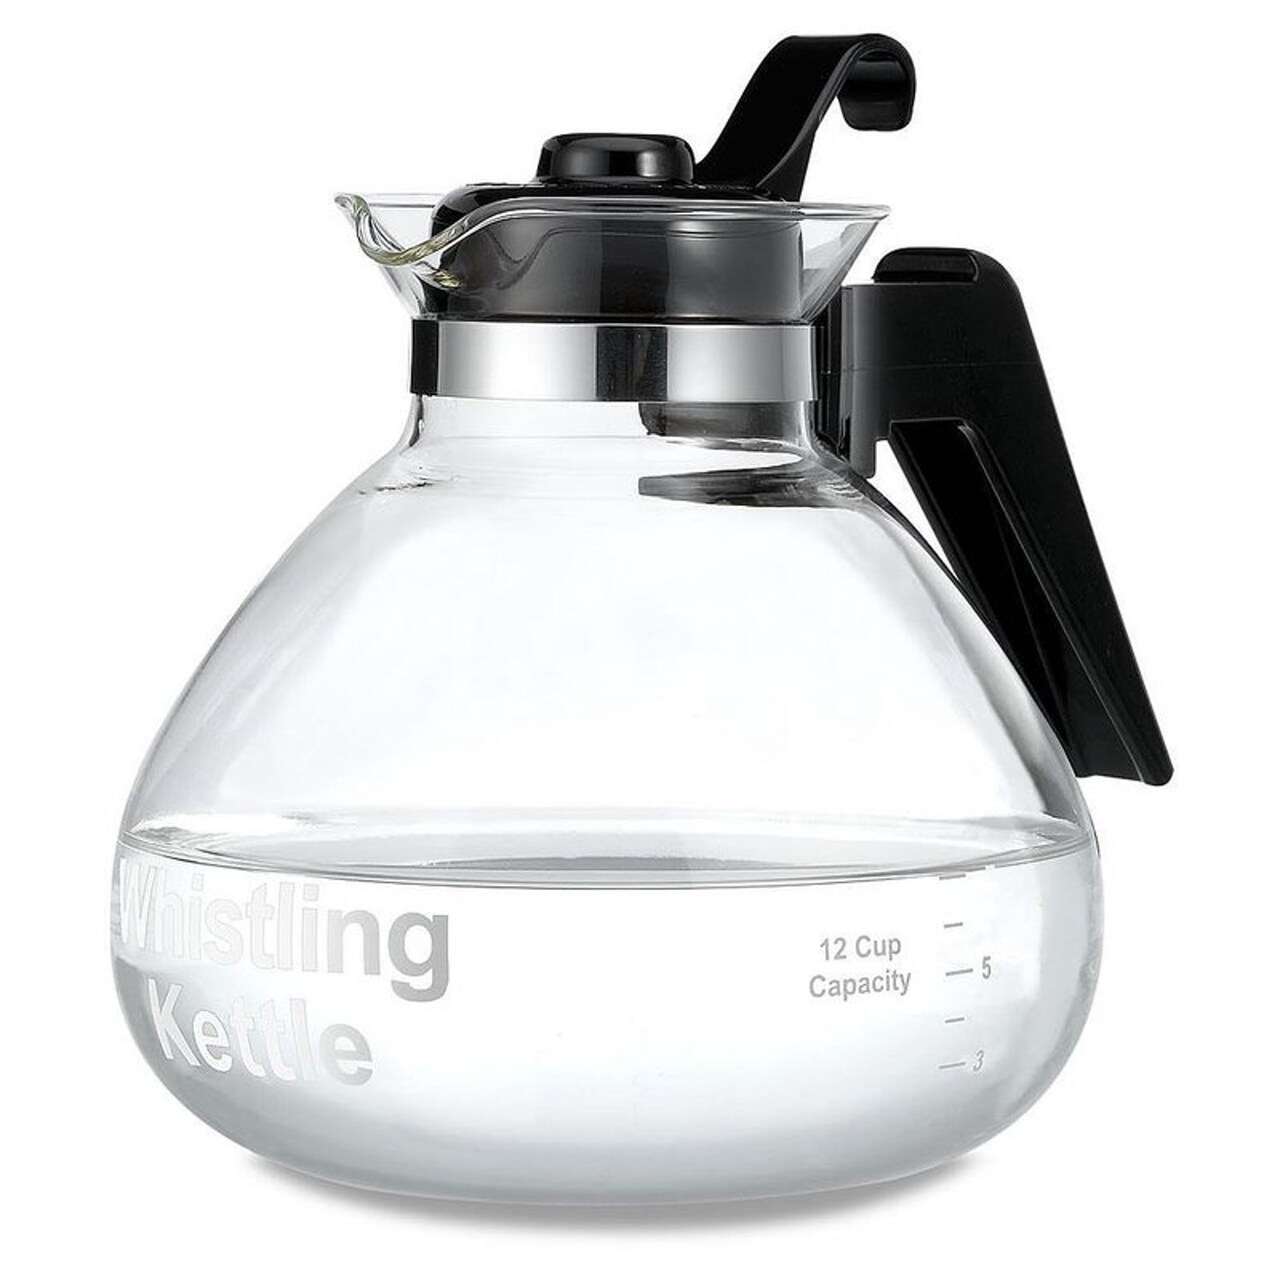 Clear Glass Whistling Tea Kettle, to Purely Brew Tea With No Metallic Taste  or Other Carafe Flavors, 12 Cup Capacity